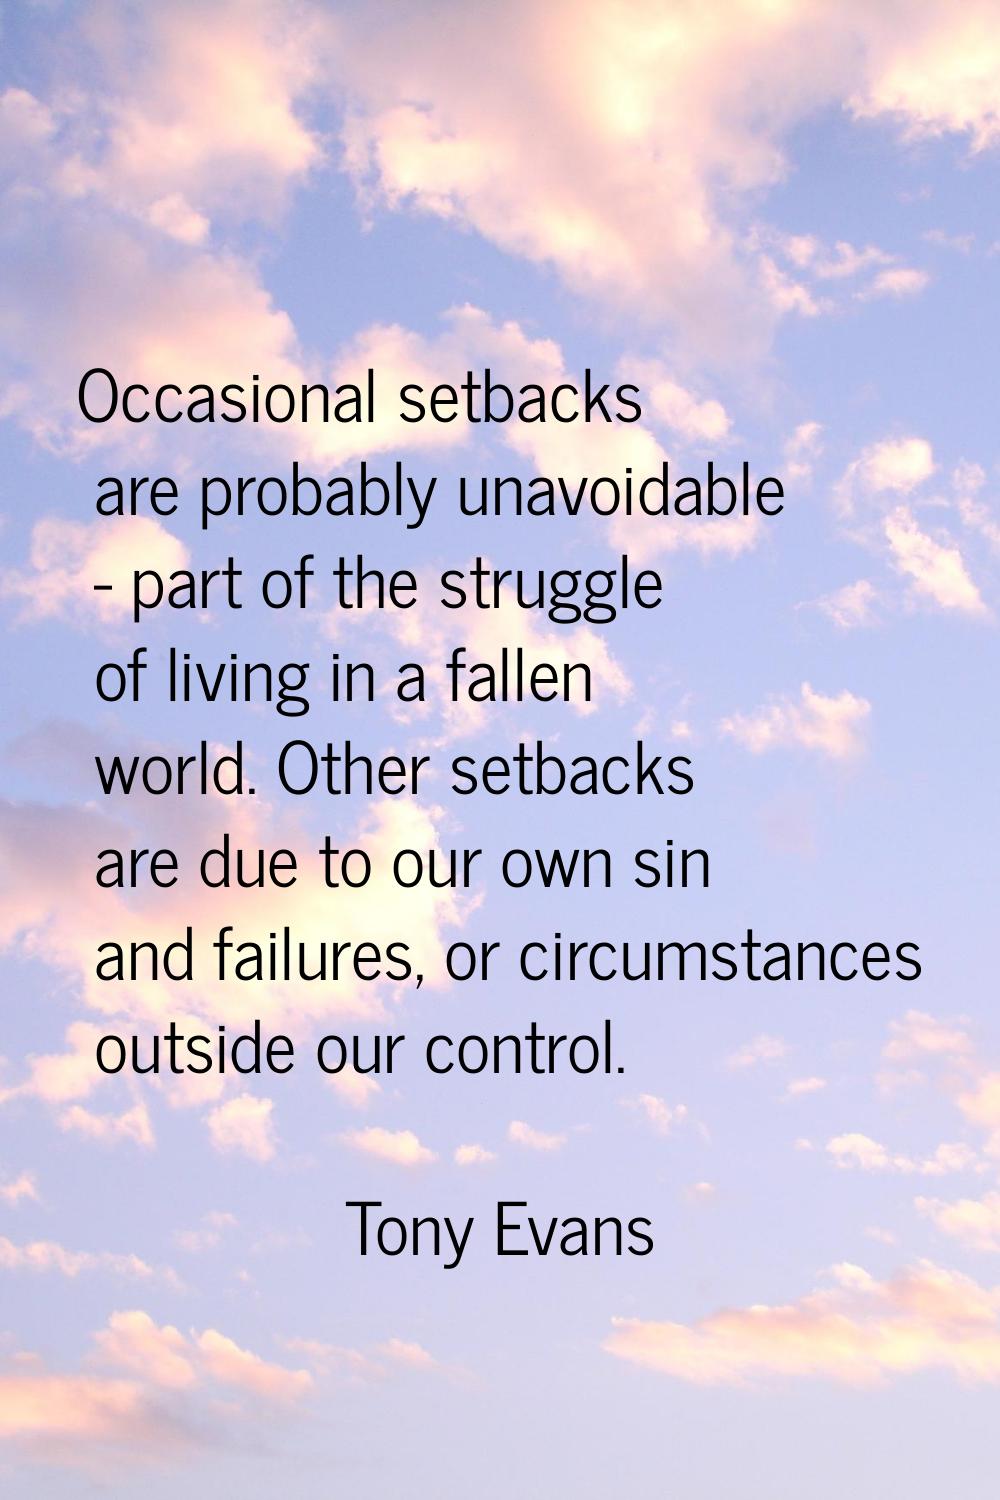 Occasional setbacks are probably unavoidable - part of the struggle of living in a fallen world. Ot